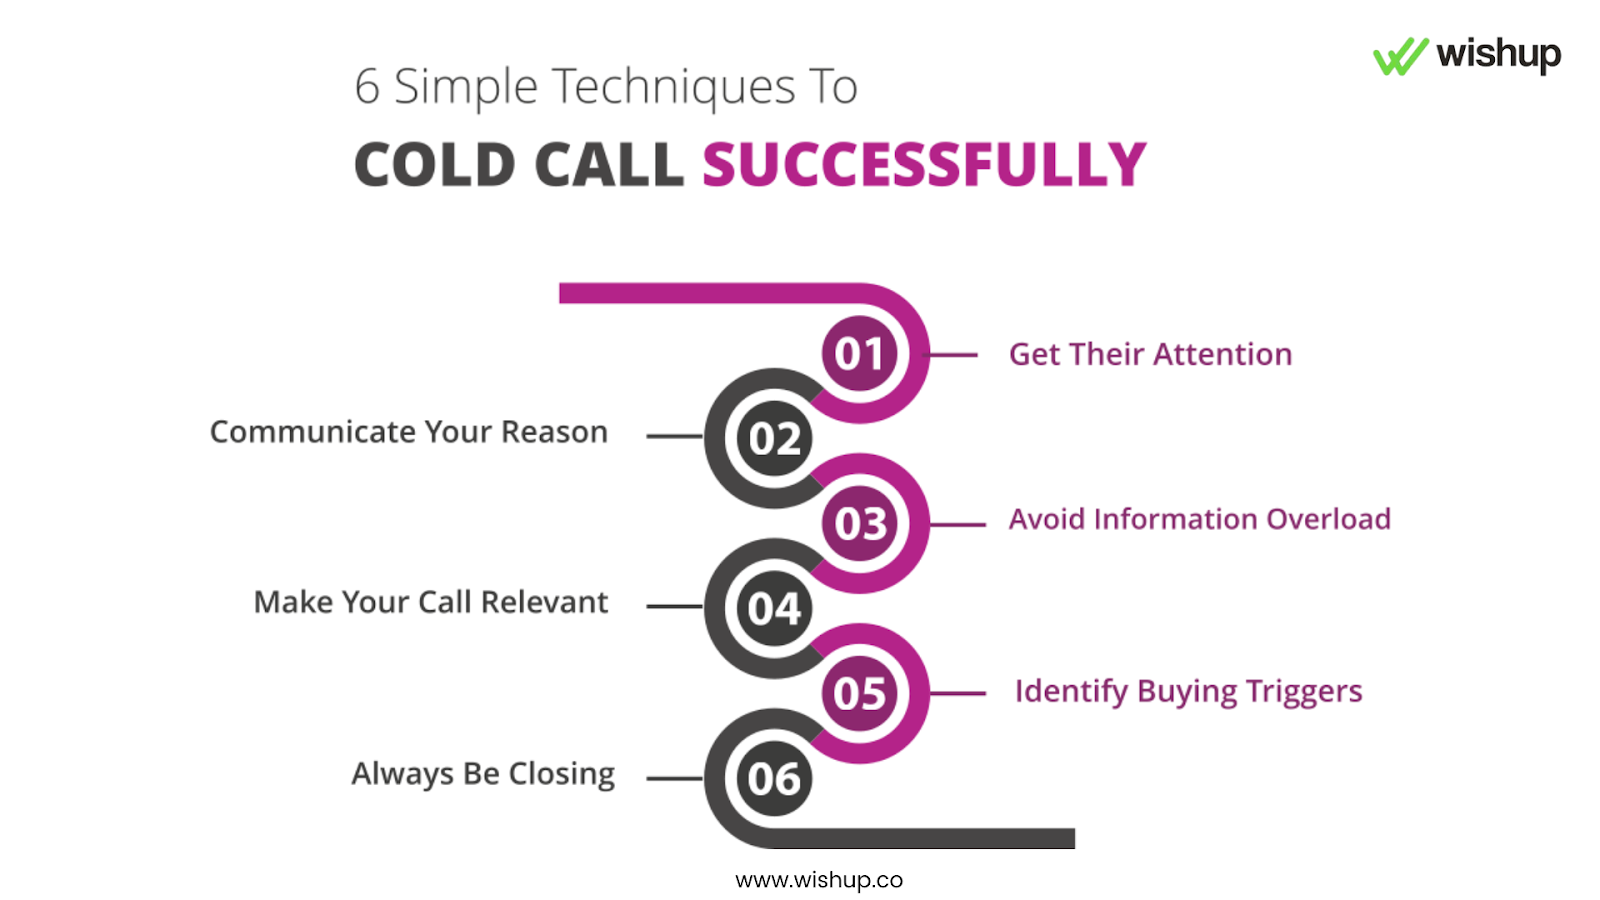 6 simple techniques to cold call successfully